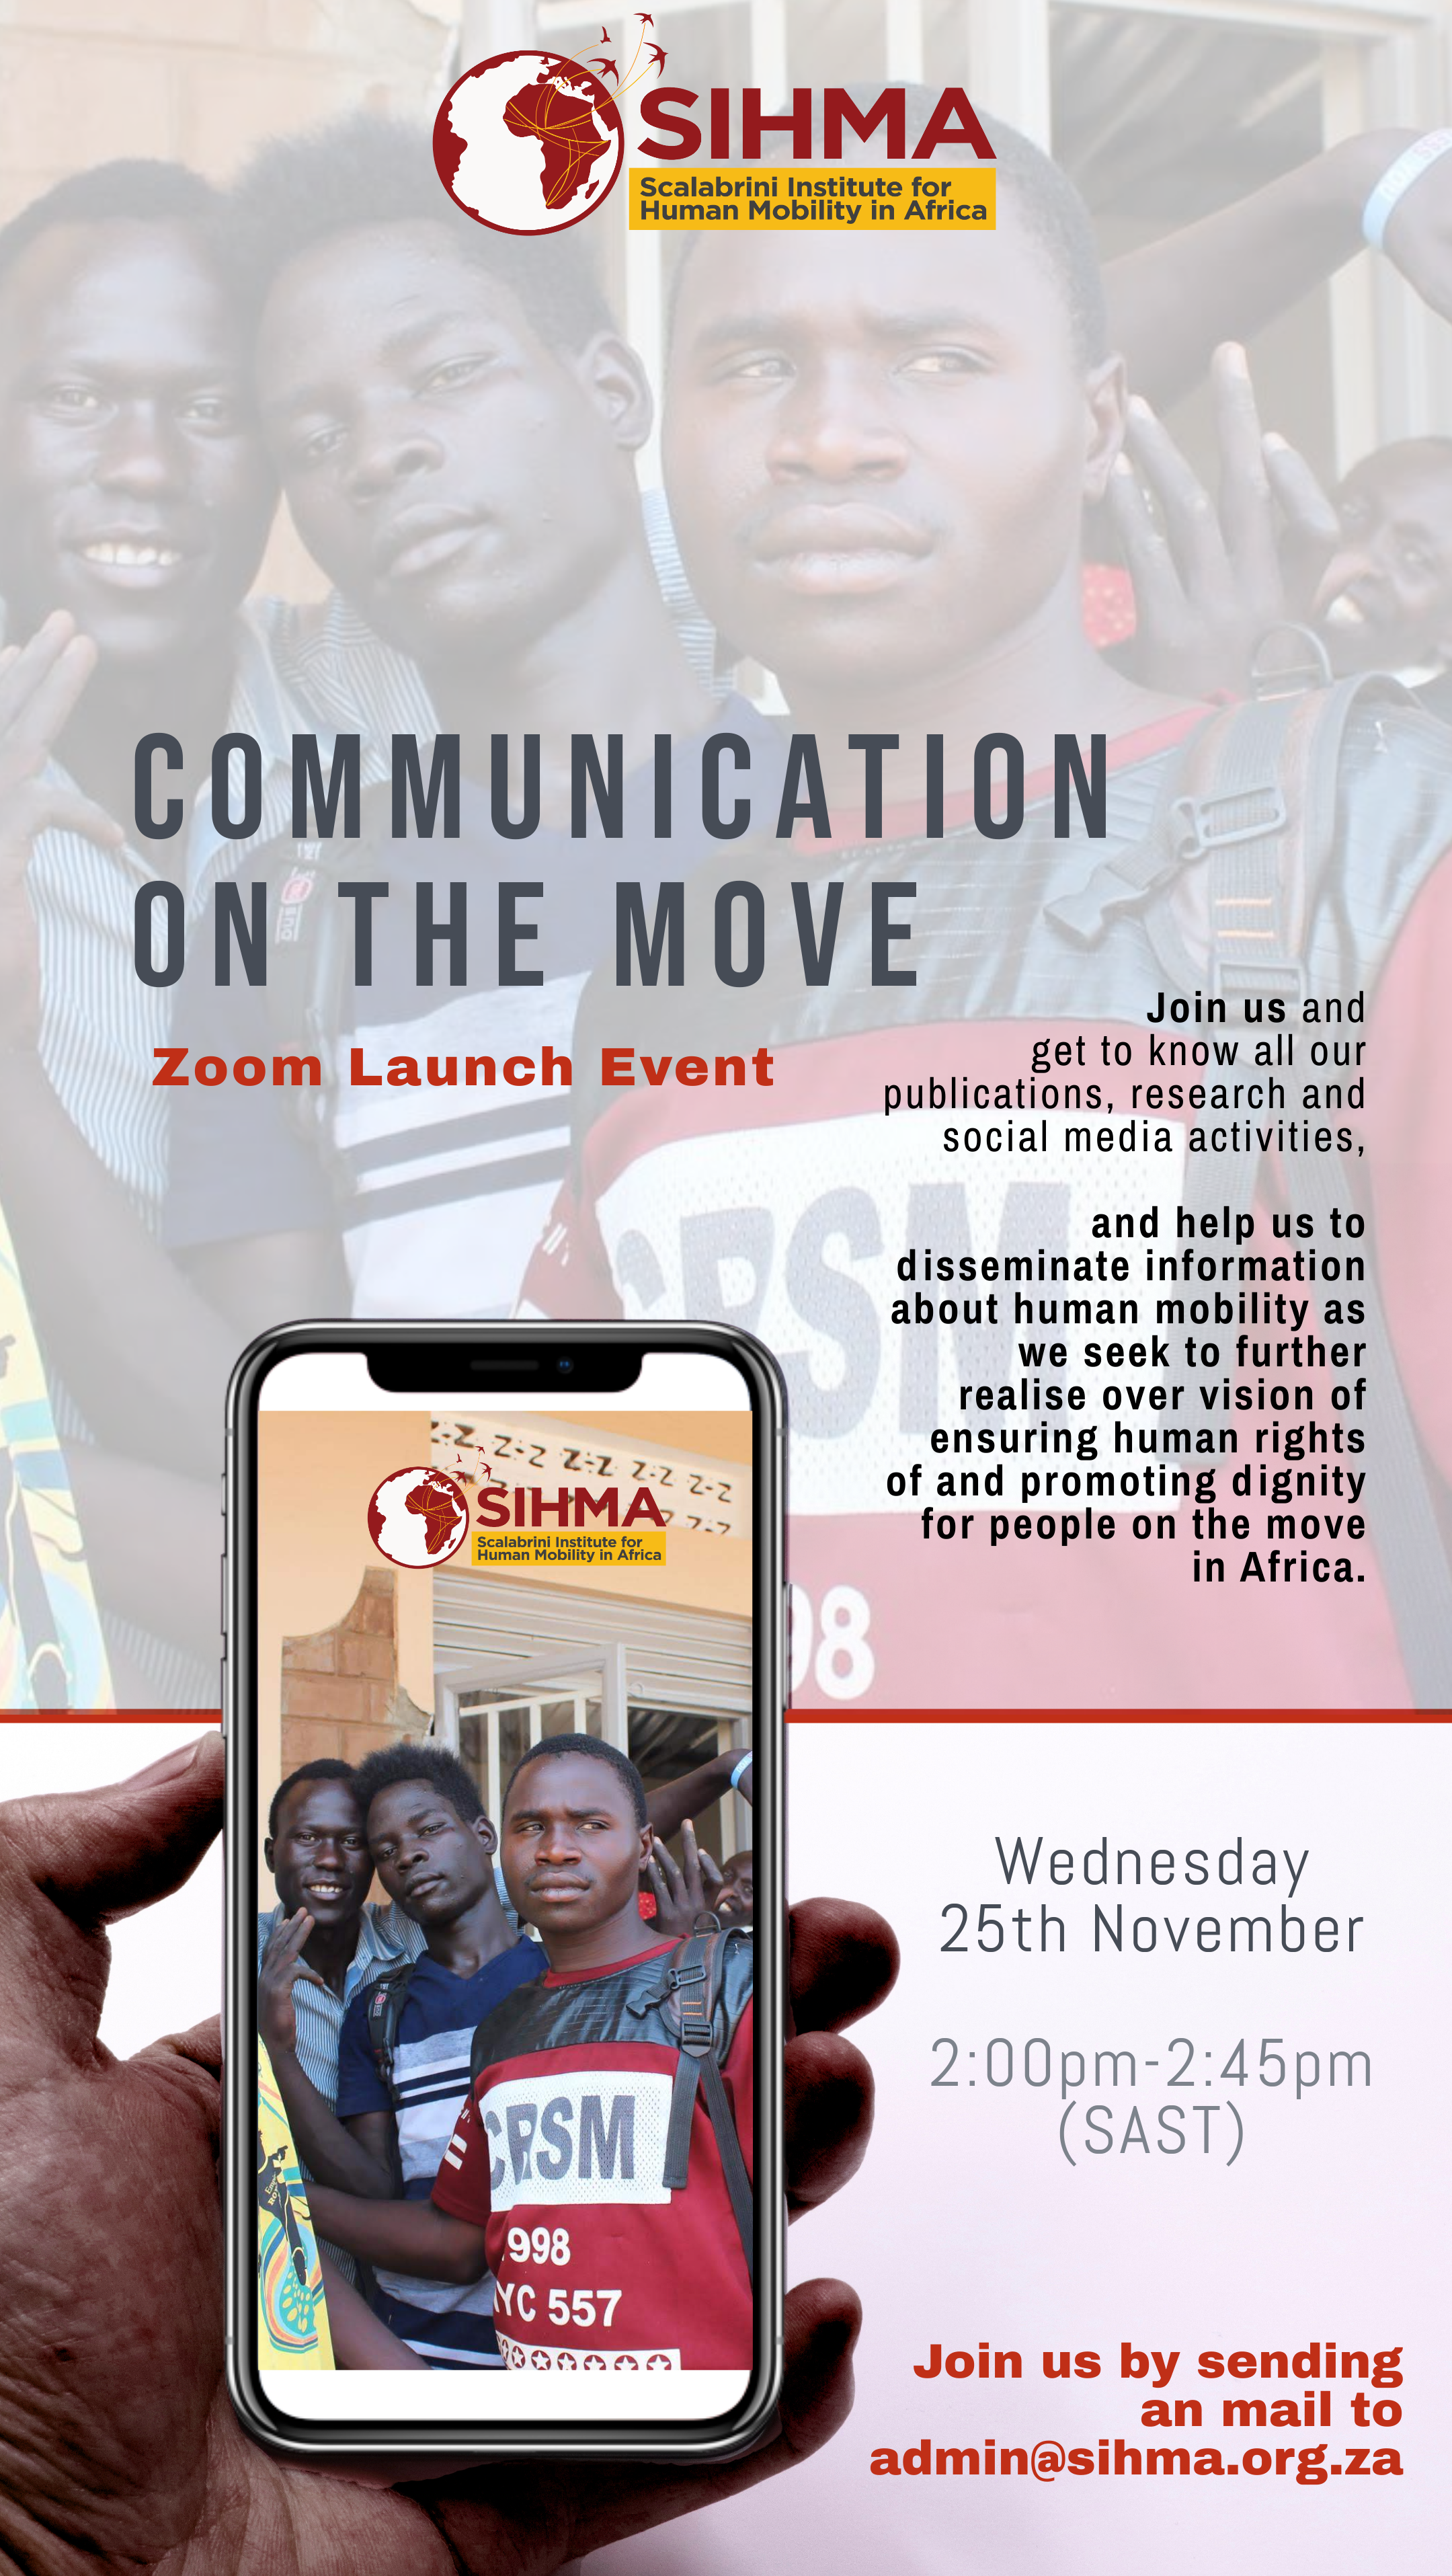 https://www.sihma.org.za/photos/shares/SIHMA Event Invitation.png